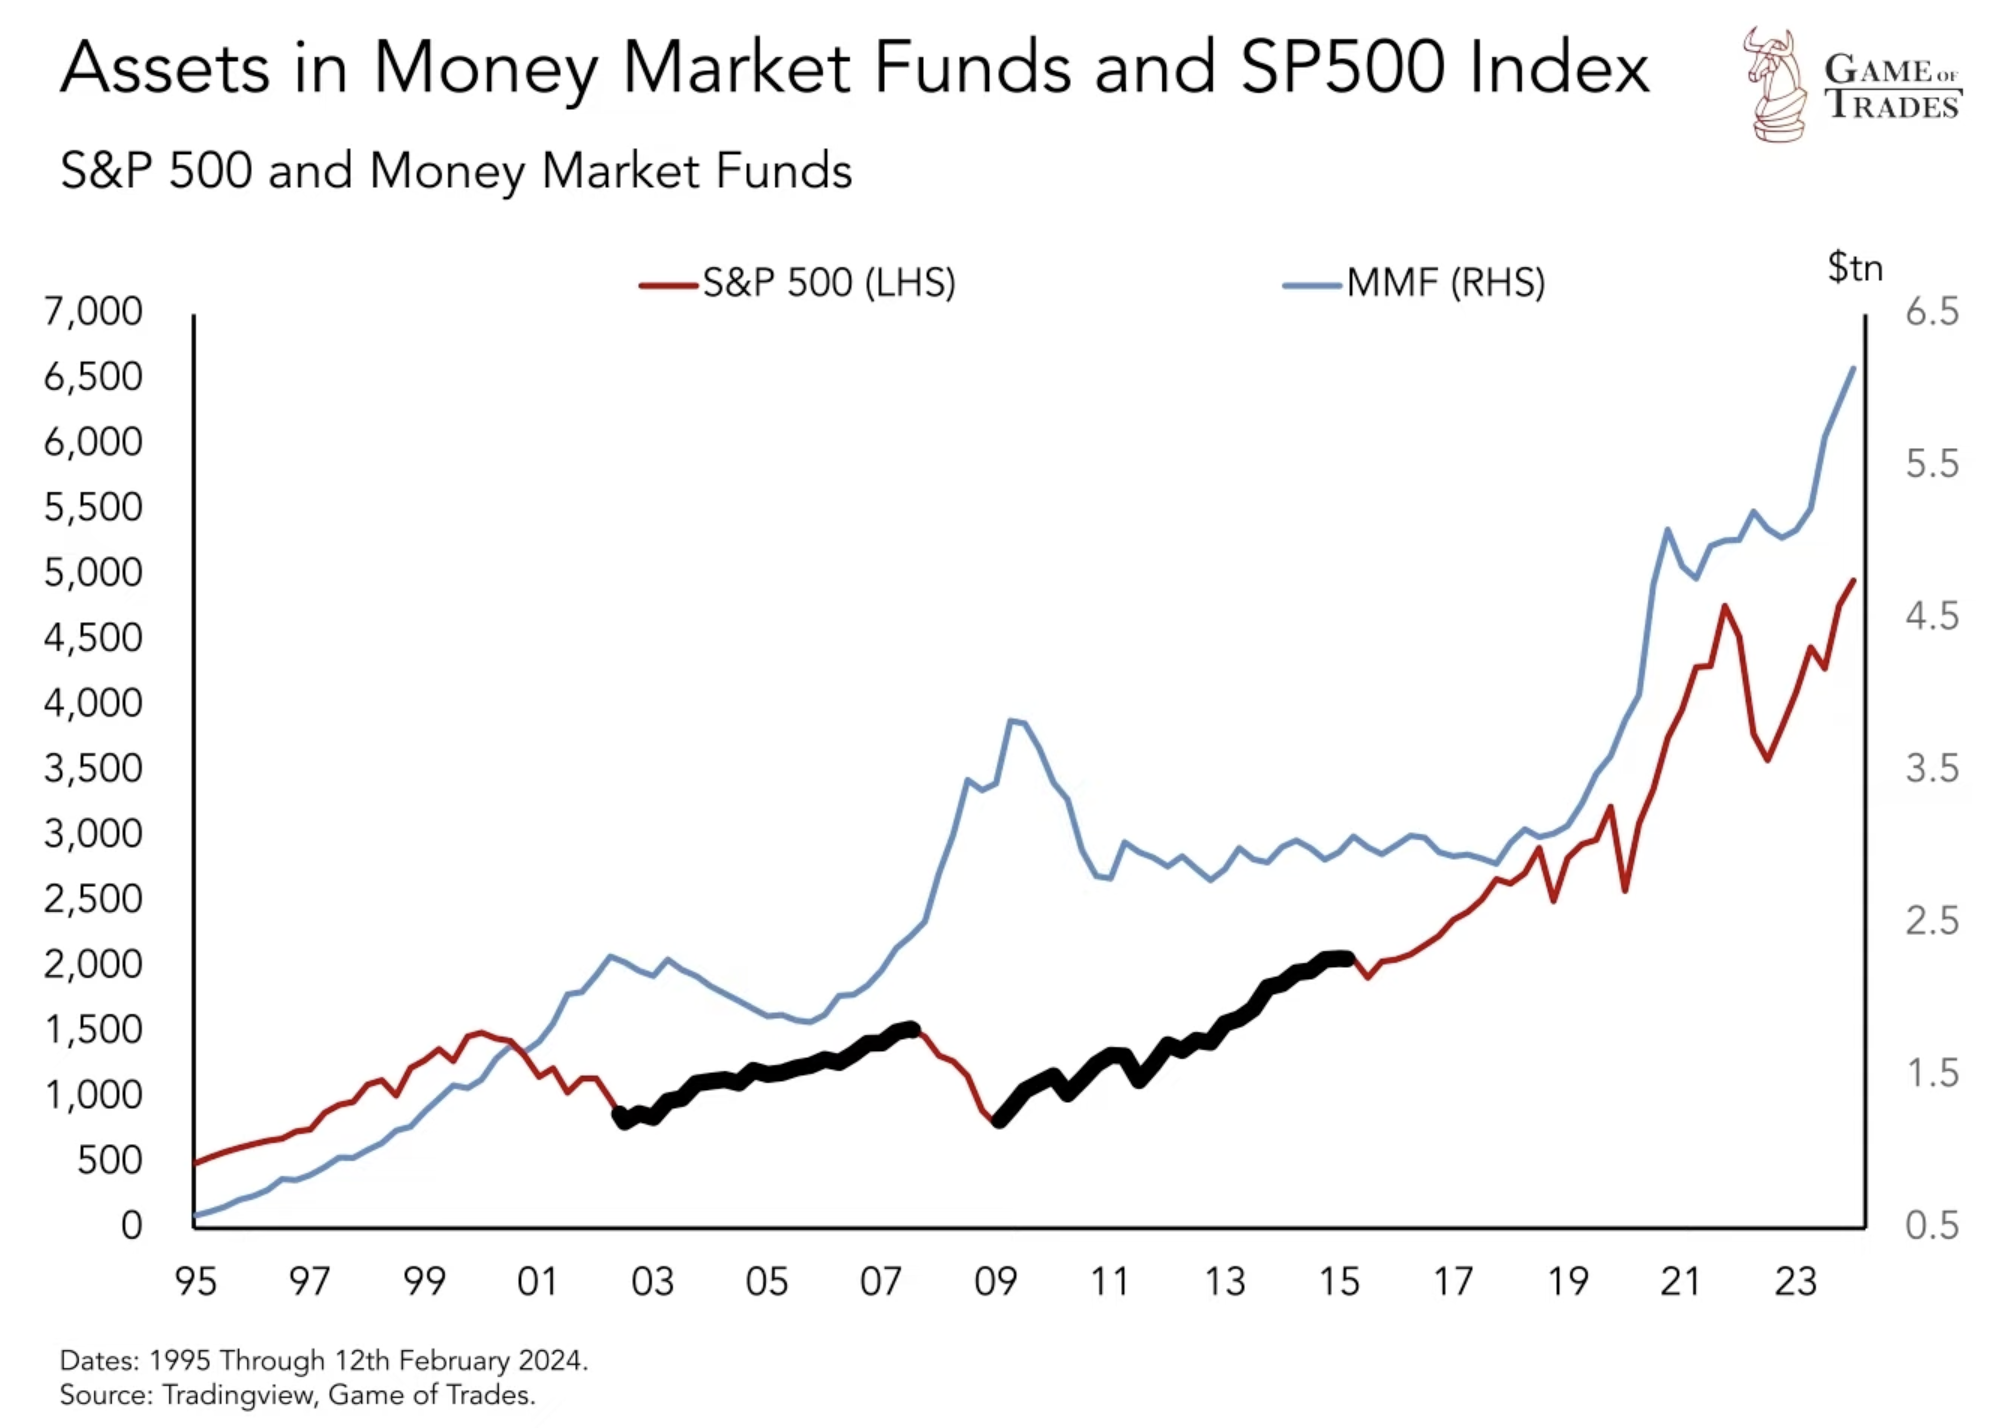 S&P 500 and Money Market Funds